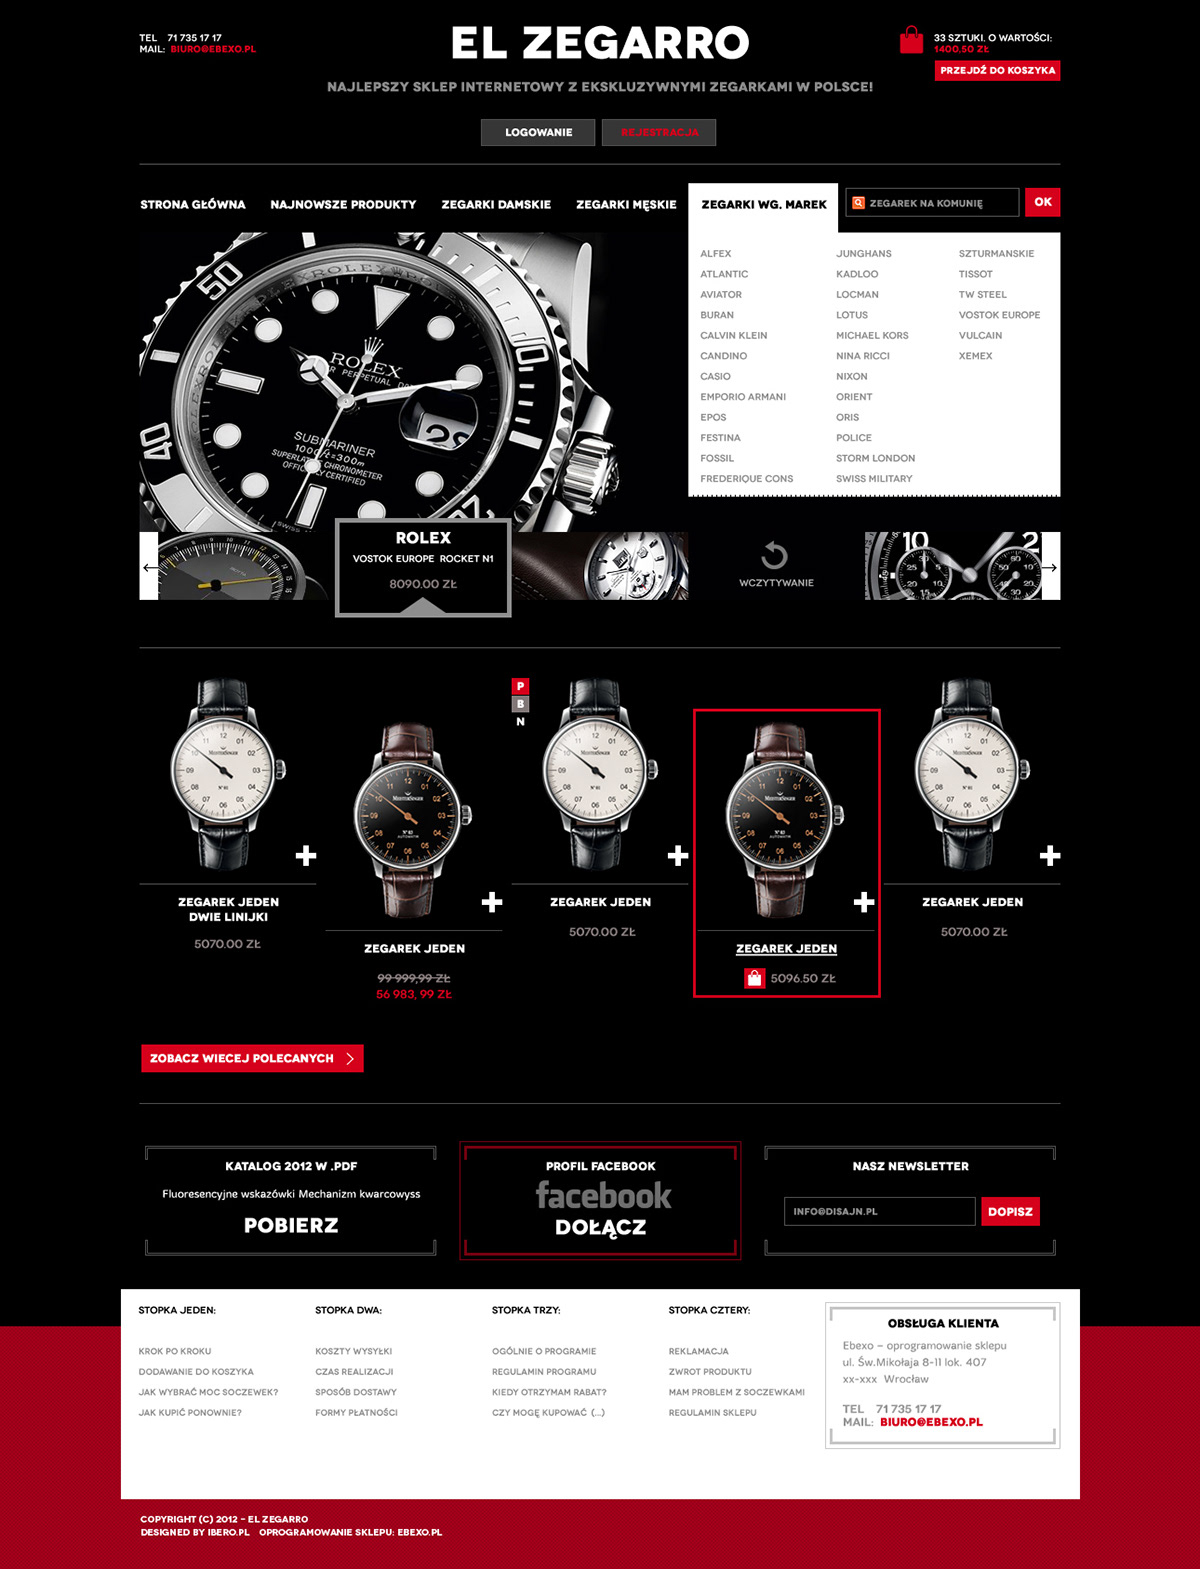 Watches watch e-commerce WATCHES SHOP watches store Online shop online strore clocks shop with watches